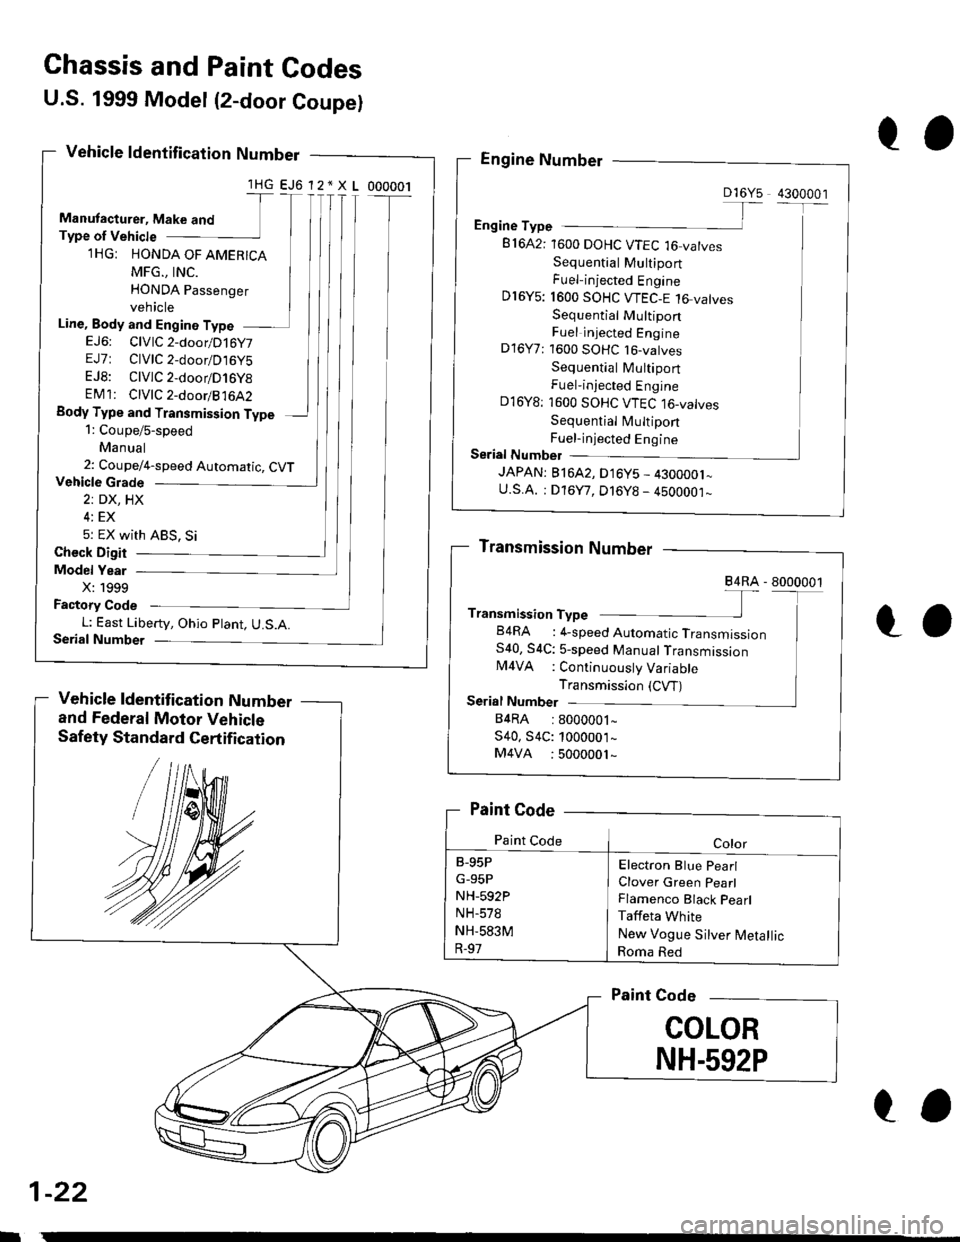 HONDA CIVIC 1996 6.G Owners Manual Chassis and Paint Codes
Vehicle Grade
2: DX, HX
4: EX
5: EX With ABS, Si
Check Digit
Model Year
X:1999
Factory Code
L: East Liberty, Ohio Plant, U.S.A.Serial Number
Vehicle ldentification Number
and F